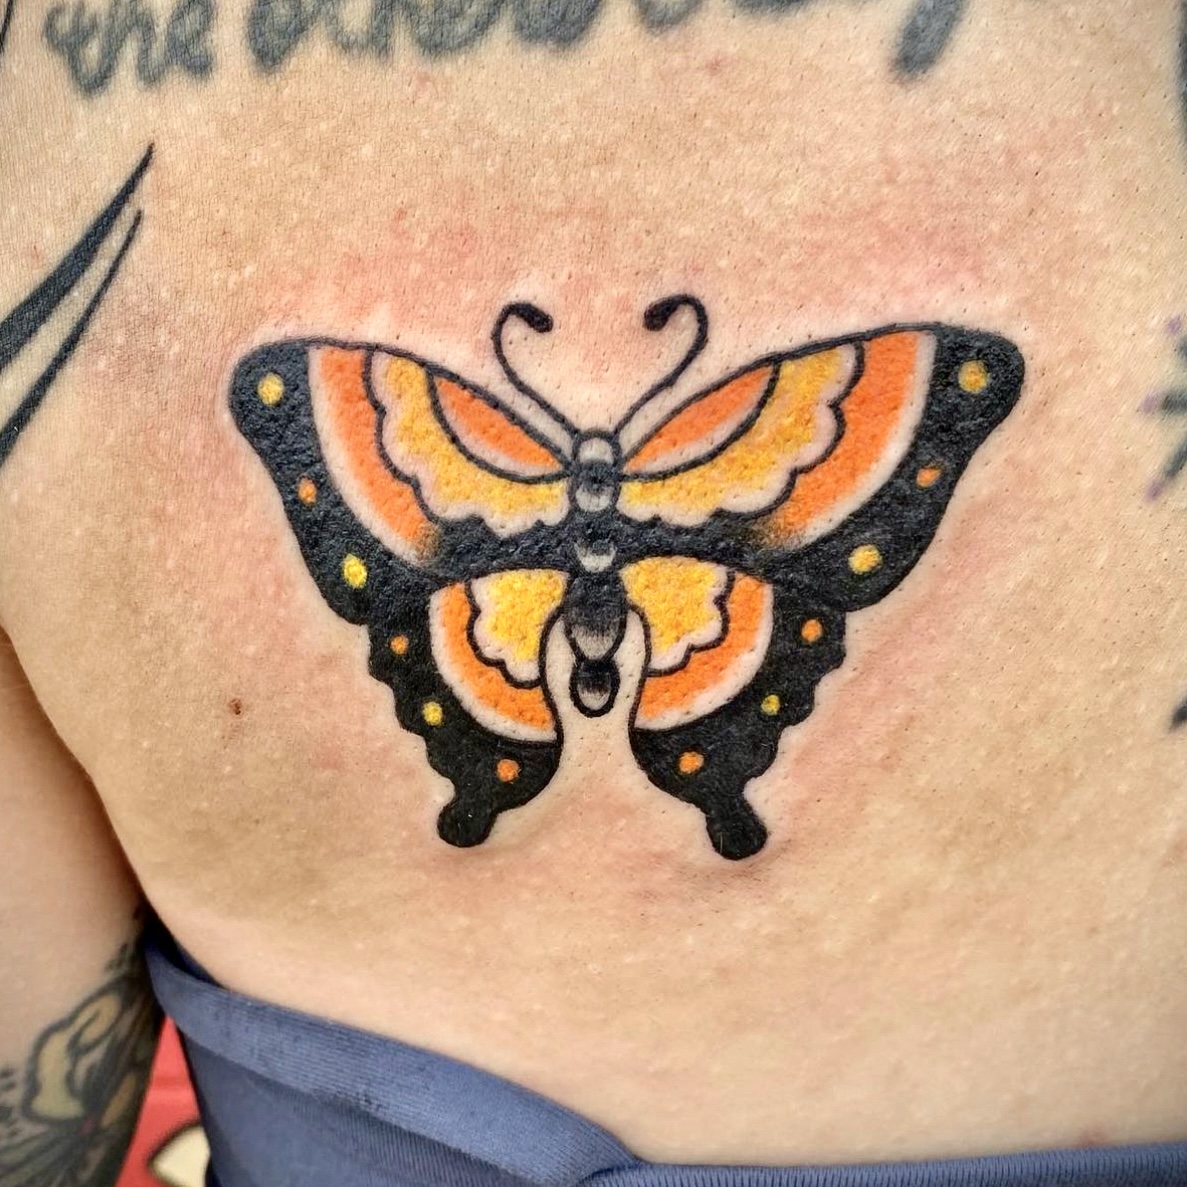 Tattoo of a orange and yellow butterfly